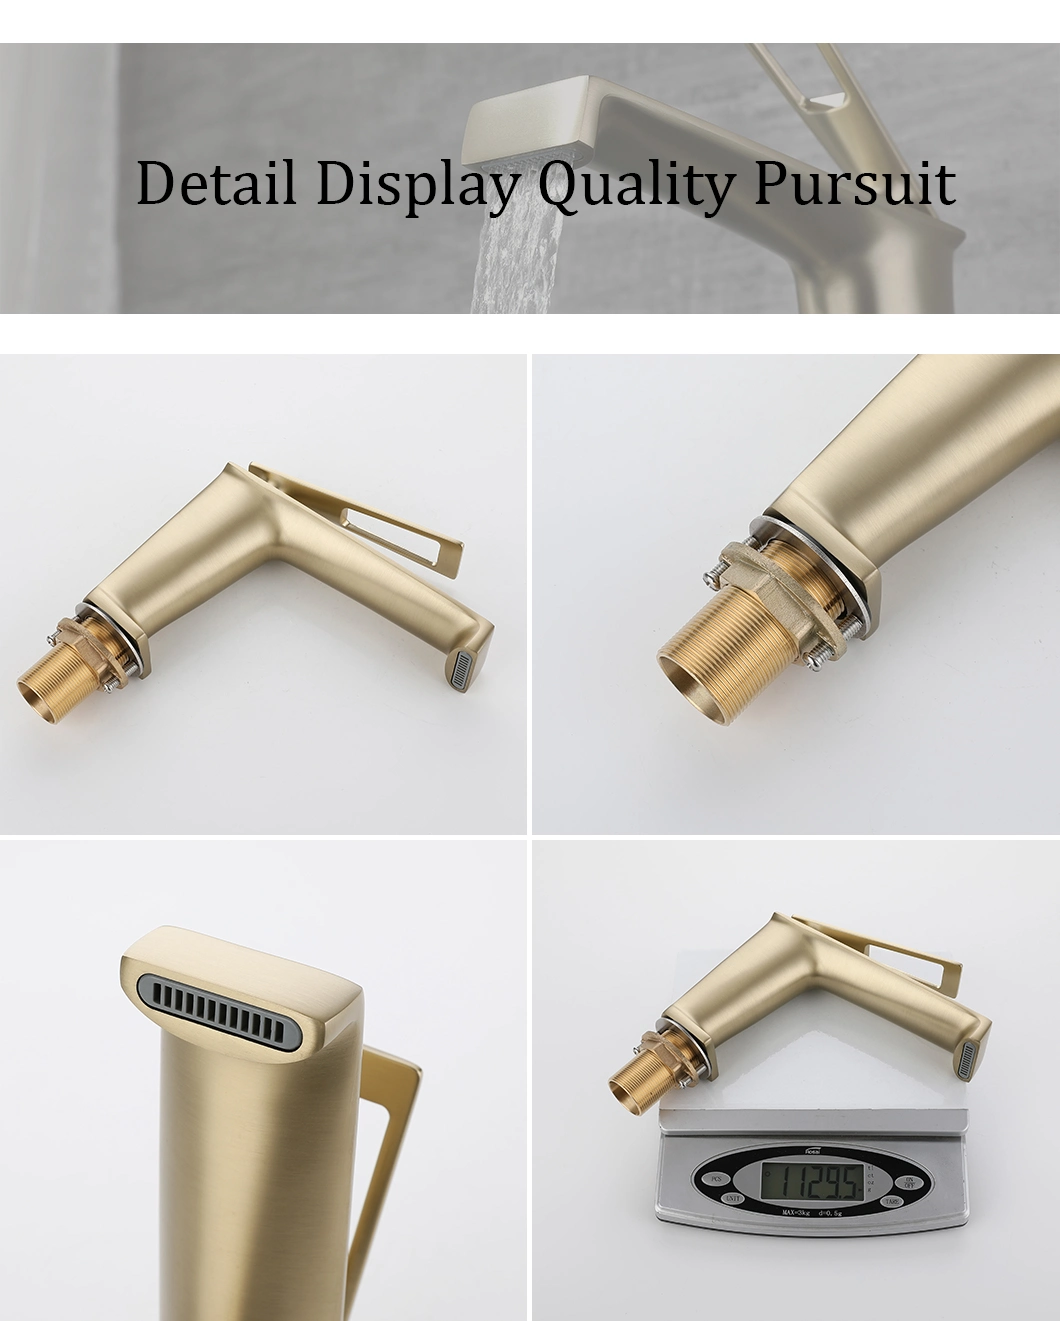 Ablinox OEM ODM Manufacturer 304 Stainless Steel Bathroom Accessory Bath Tub Brass Wash Shower Waterfall Basin Water Tap Sink Mixer Faucet